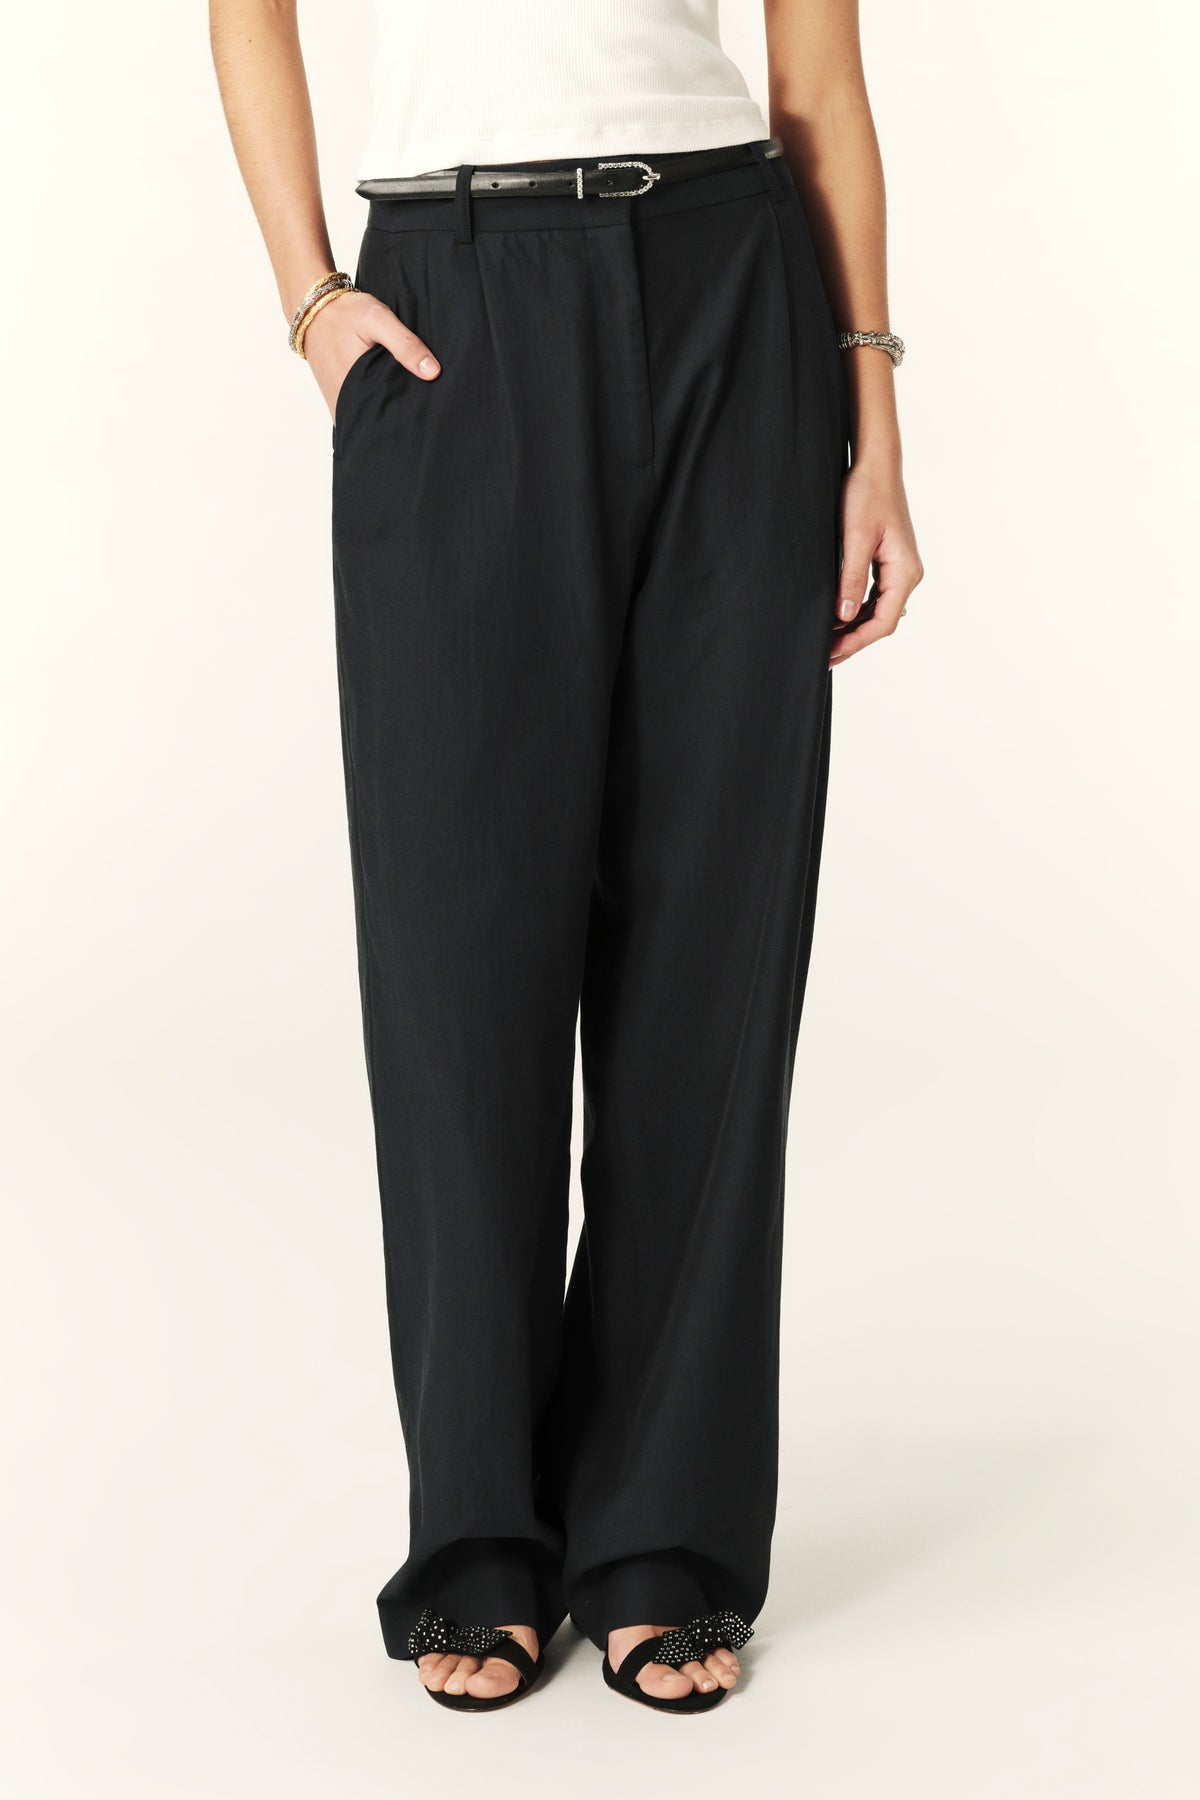 Navy blue smart trousers with front pleats